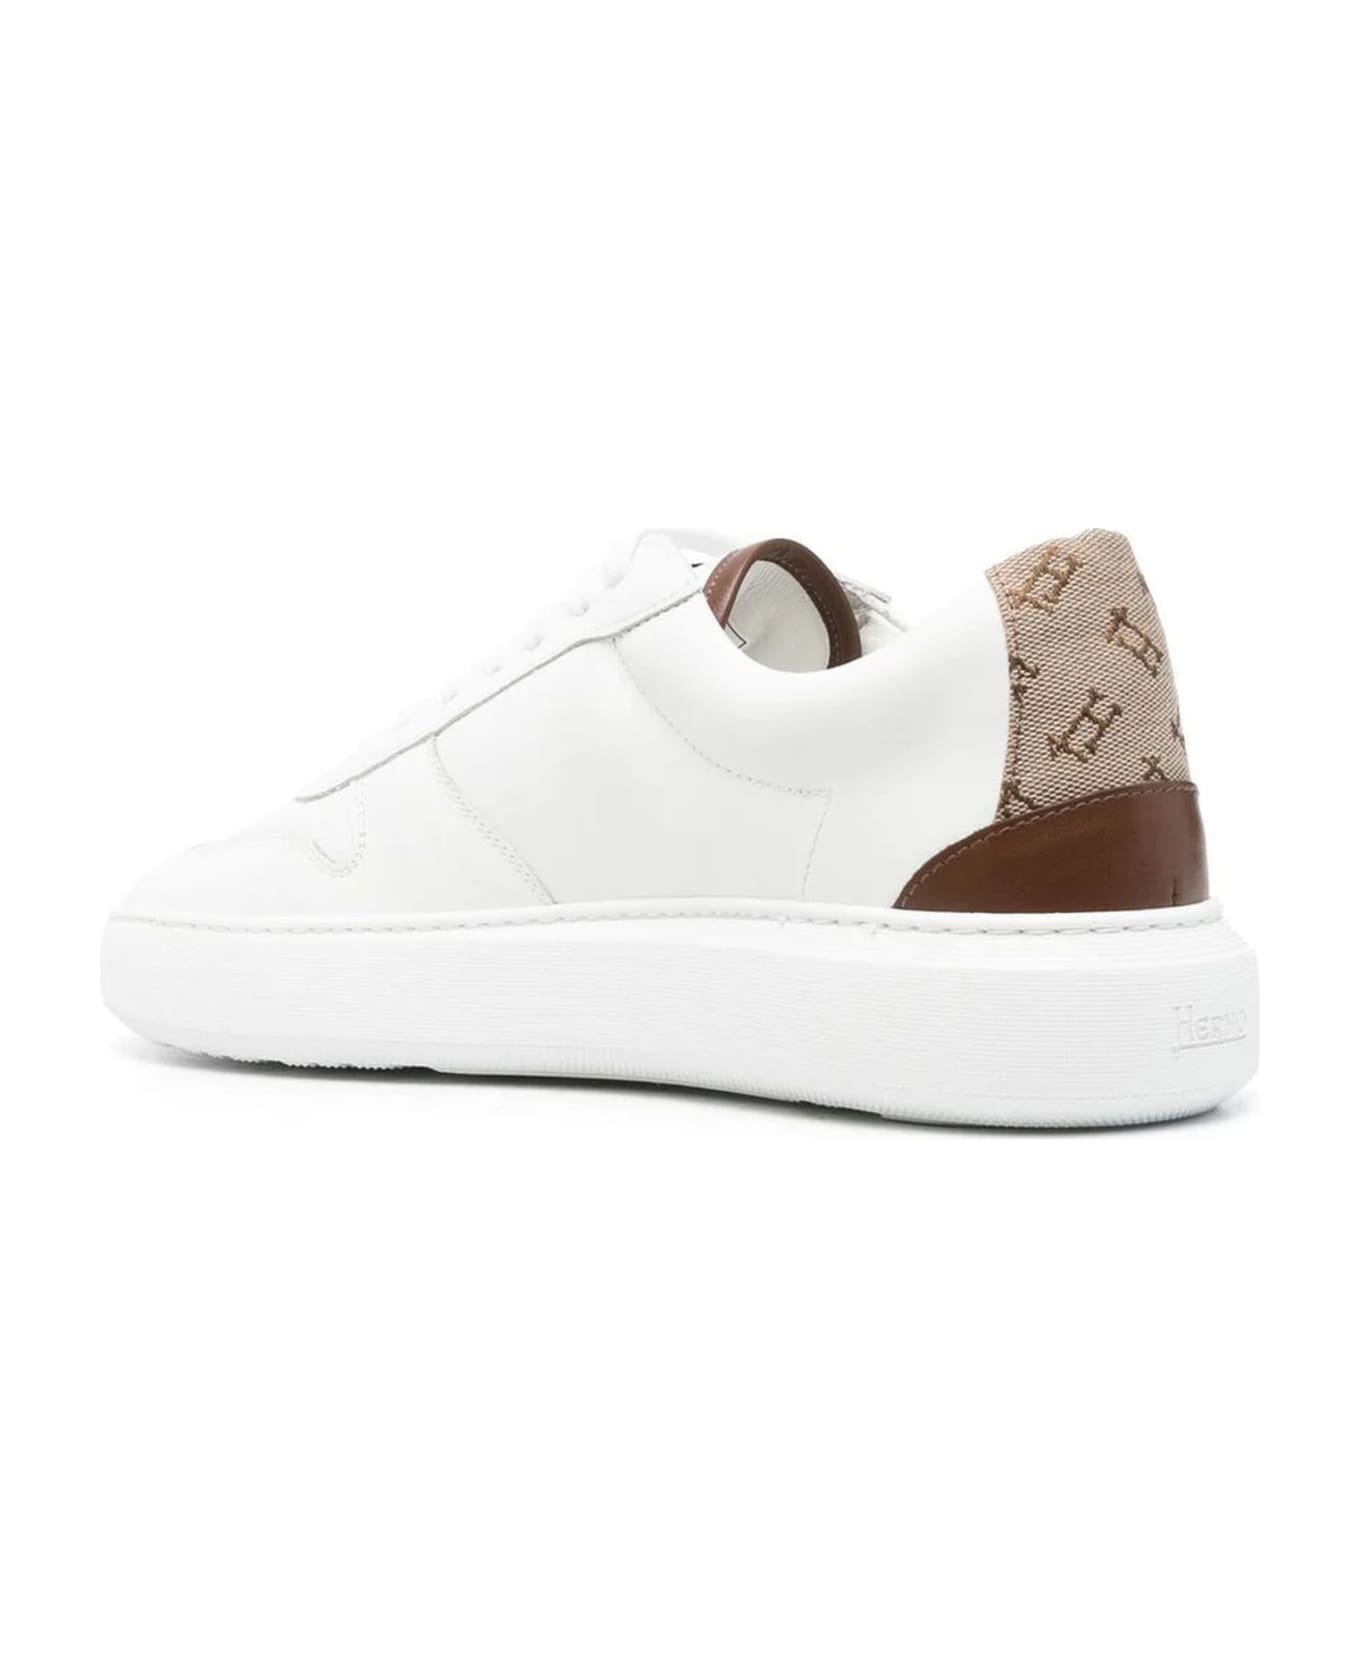 Herno White Calf Leather Sneakers - Bianco